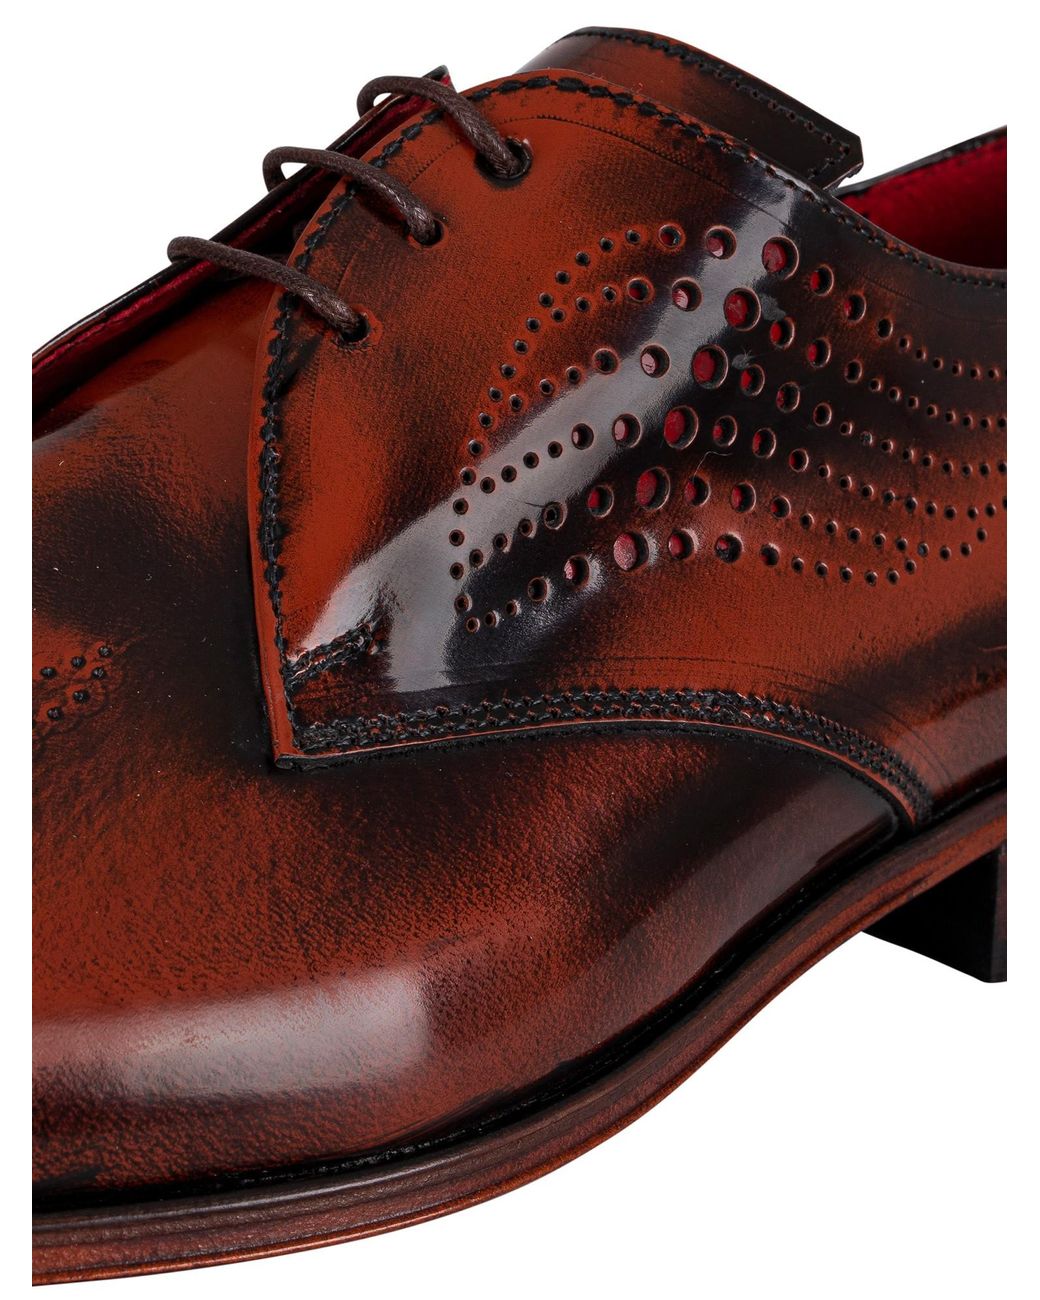 Brown Jeffery West Derby Brogue Polished Leather Shoes in Mid Brown for Men Mens Shoes Lace-ups Brogues 